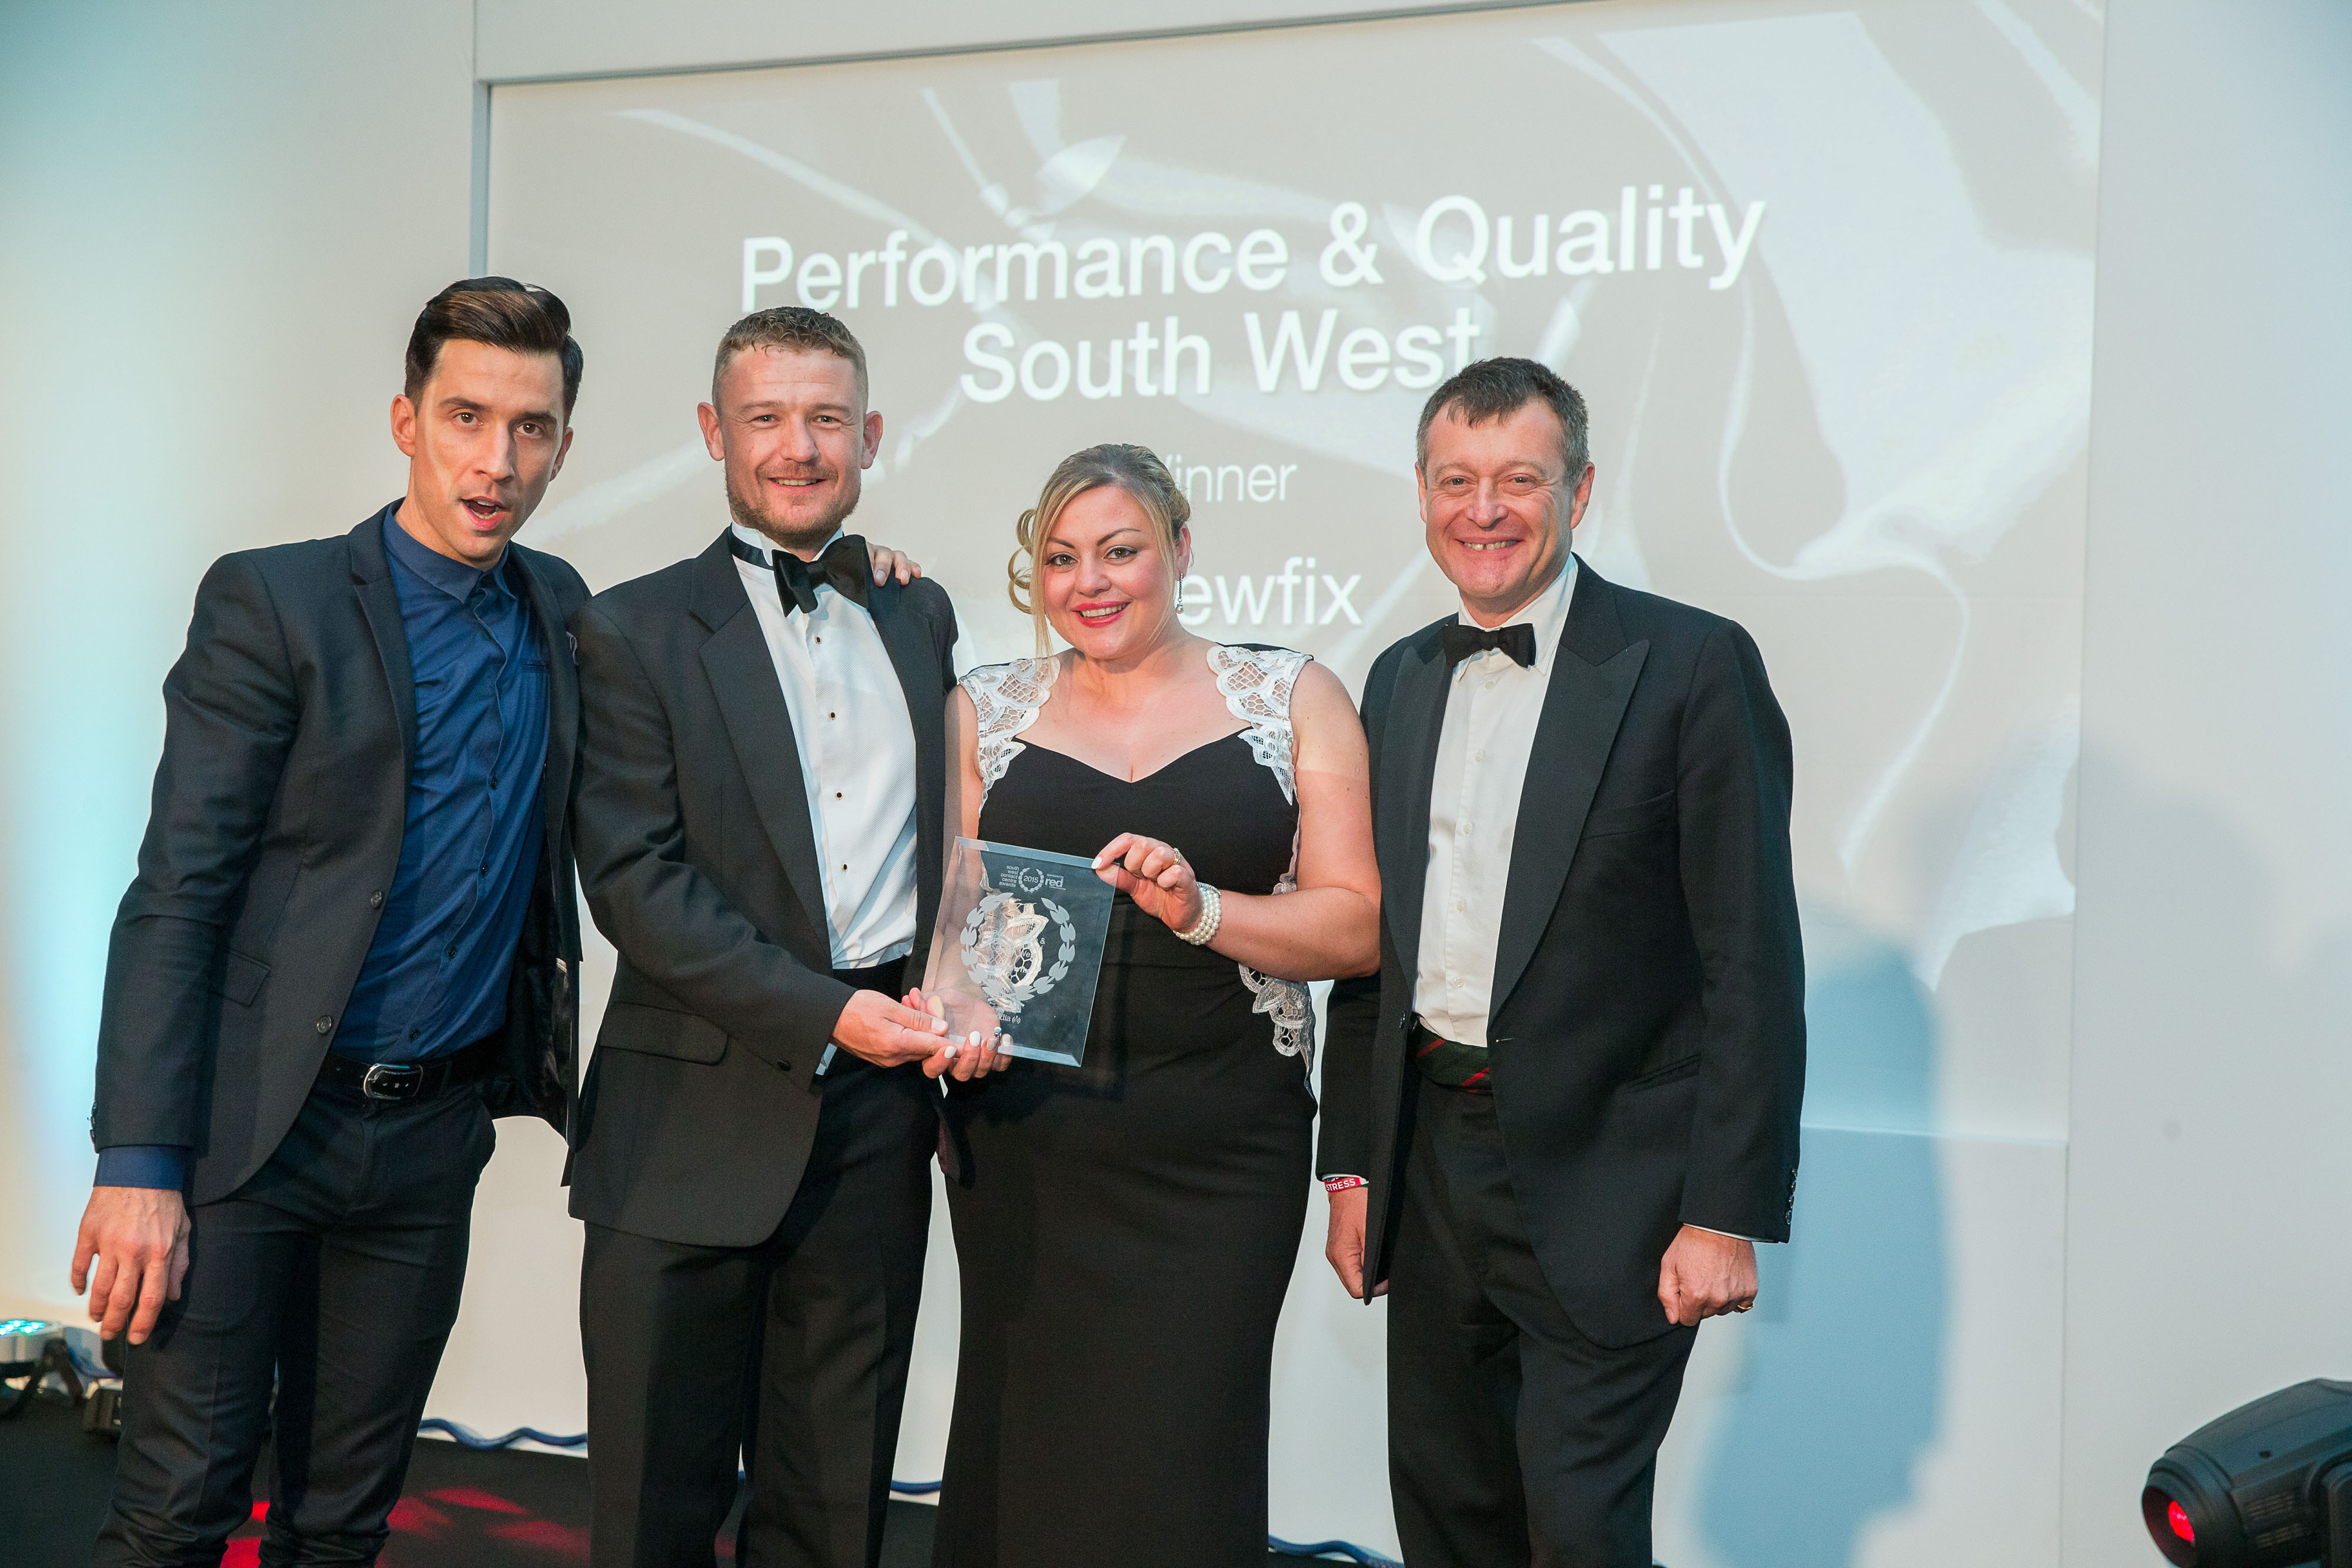 Screwfix receives Performance and Quality accolade at the South West Contact Centre Awards